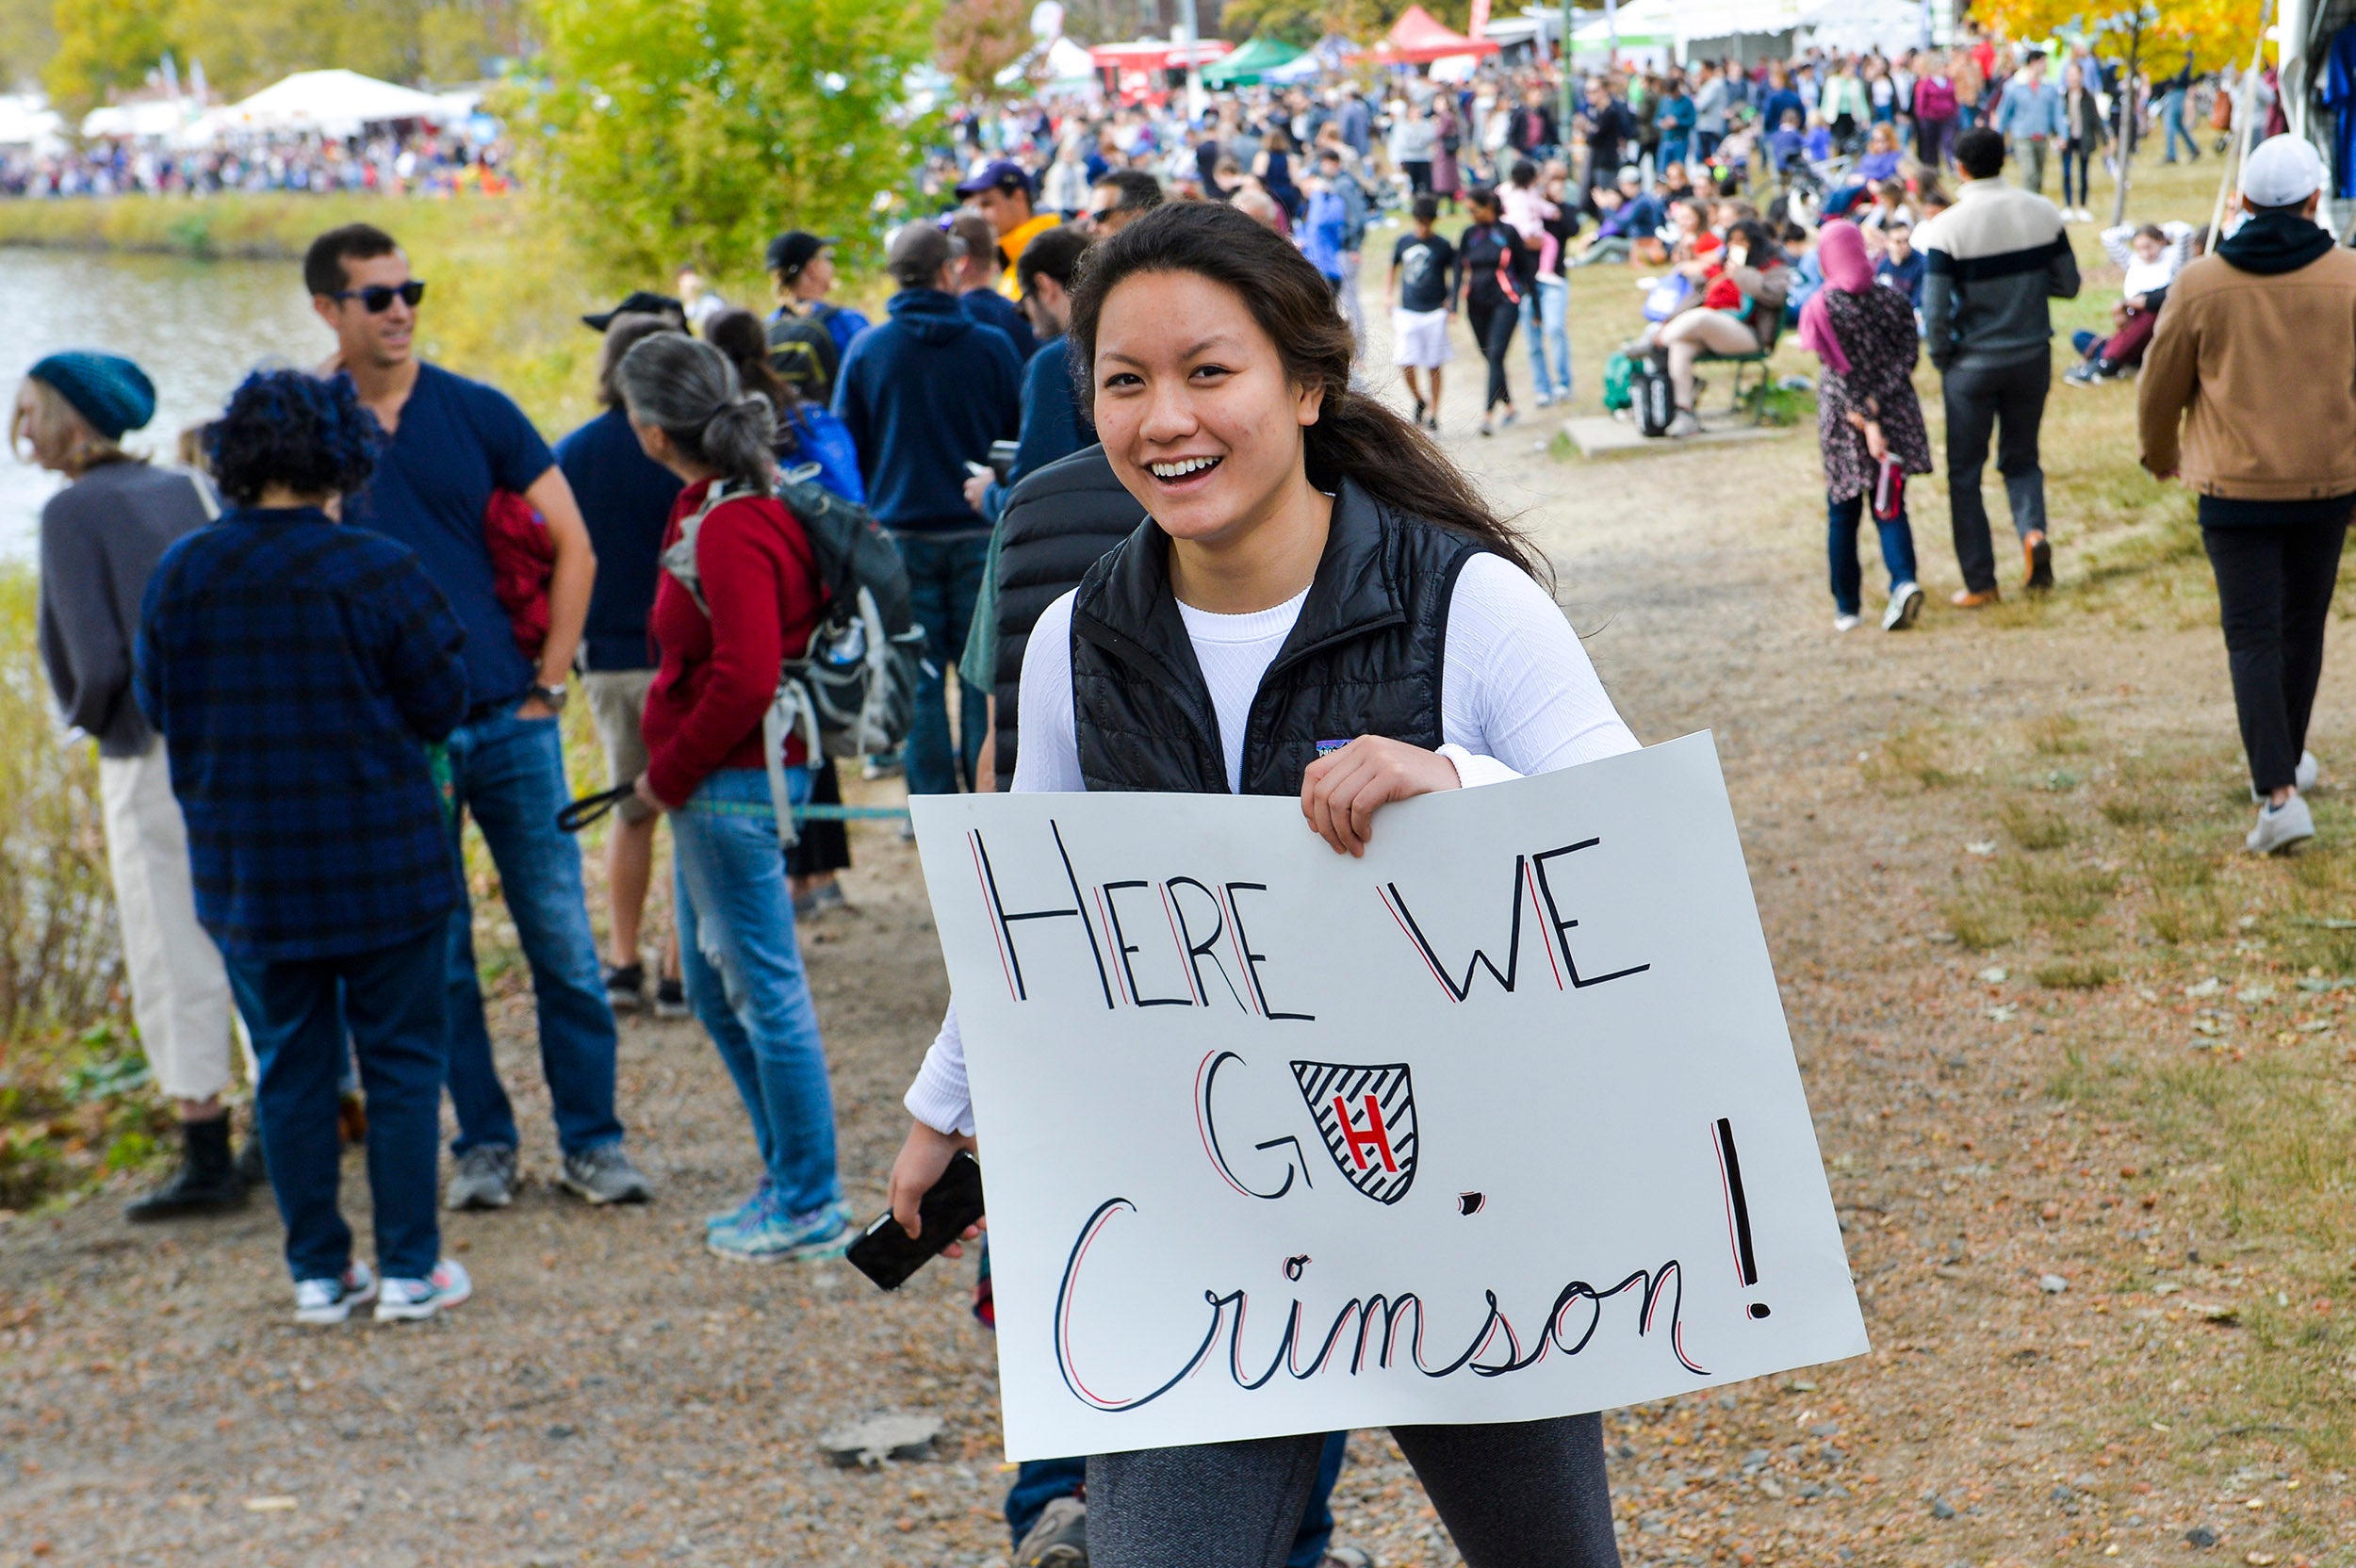 Student Athena Ye holds a sign "Here we go Crimson" during Head of the Charles weekend.